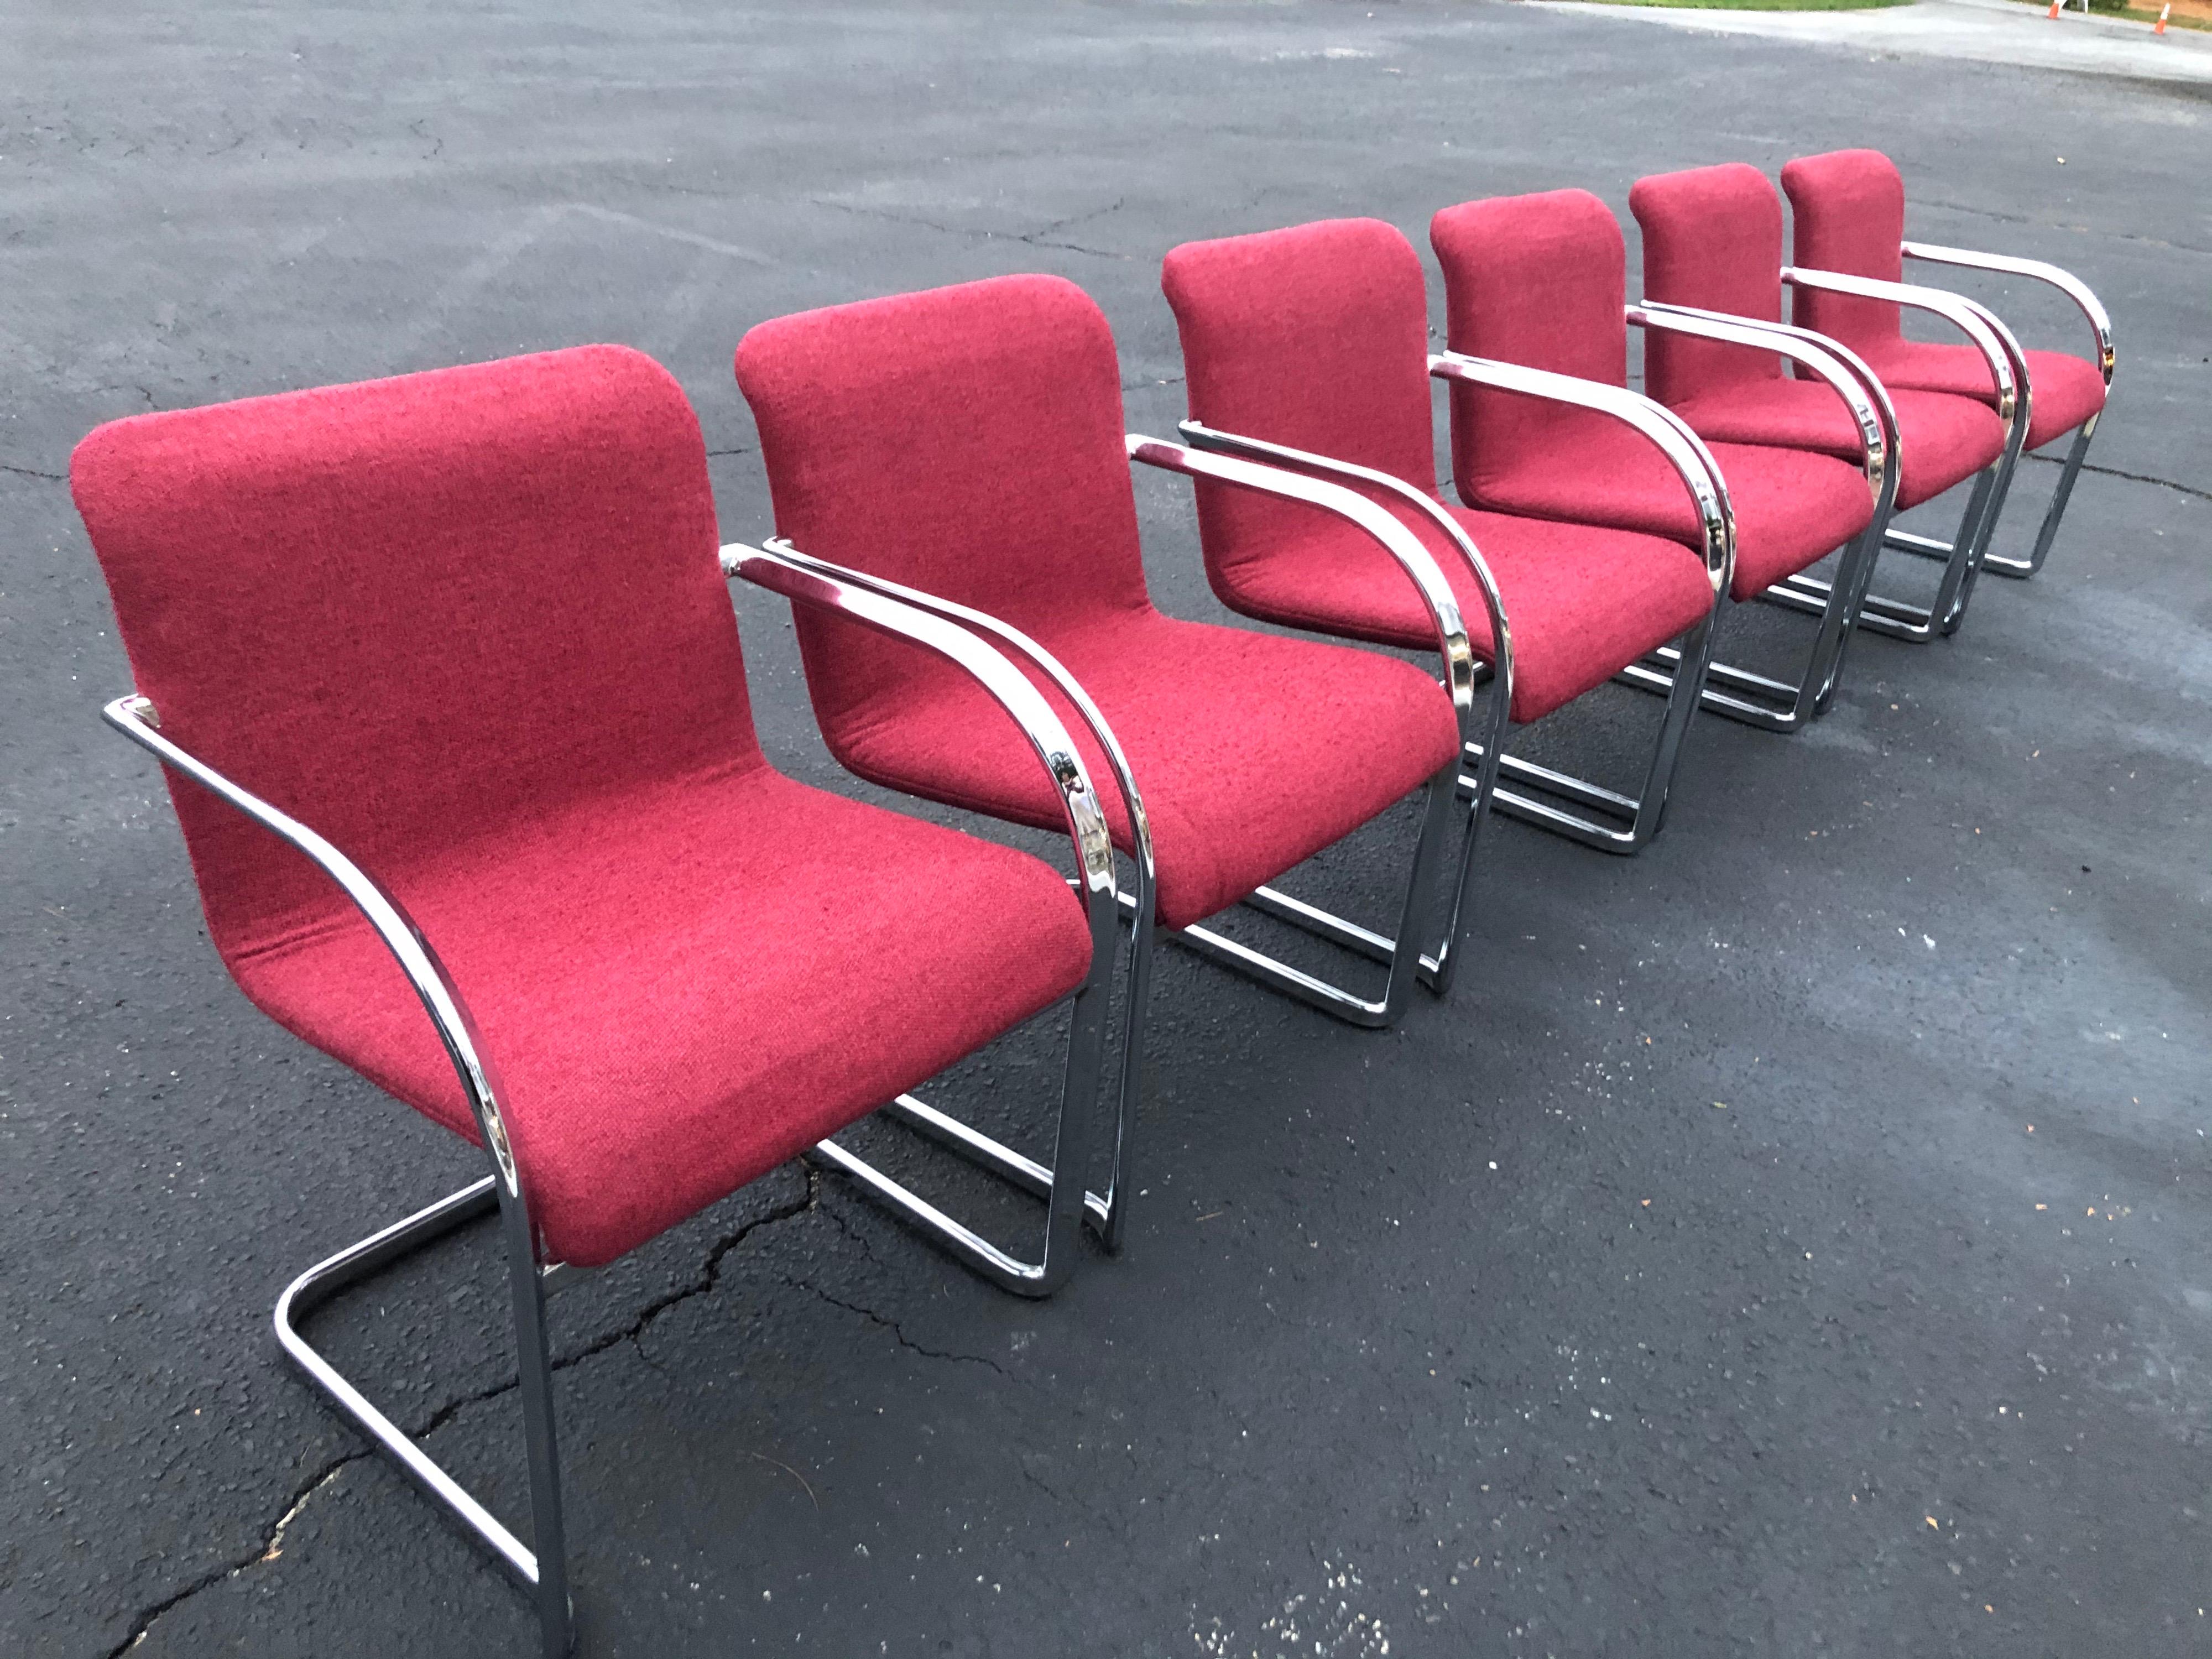 Set of six raspberry and chrome dining or office chairs. Heavy and solid construction make up these sexy 1970s style chairs. These cantilever chairs are in the style of Ludwig Mies van der Rohe. Chrome and upholstery are in very good condition.